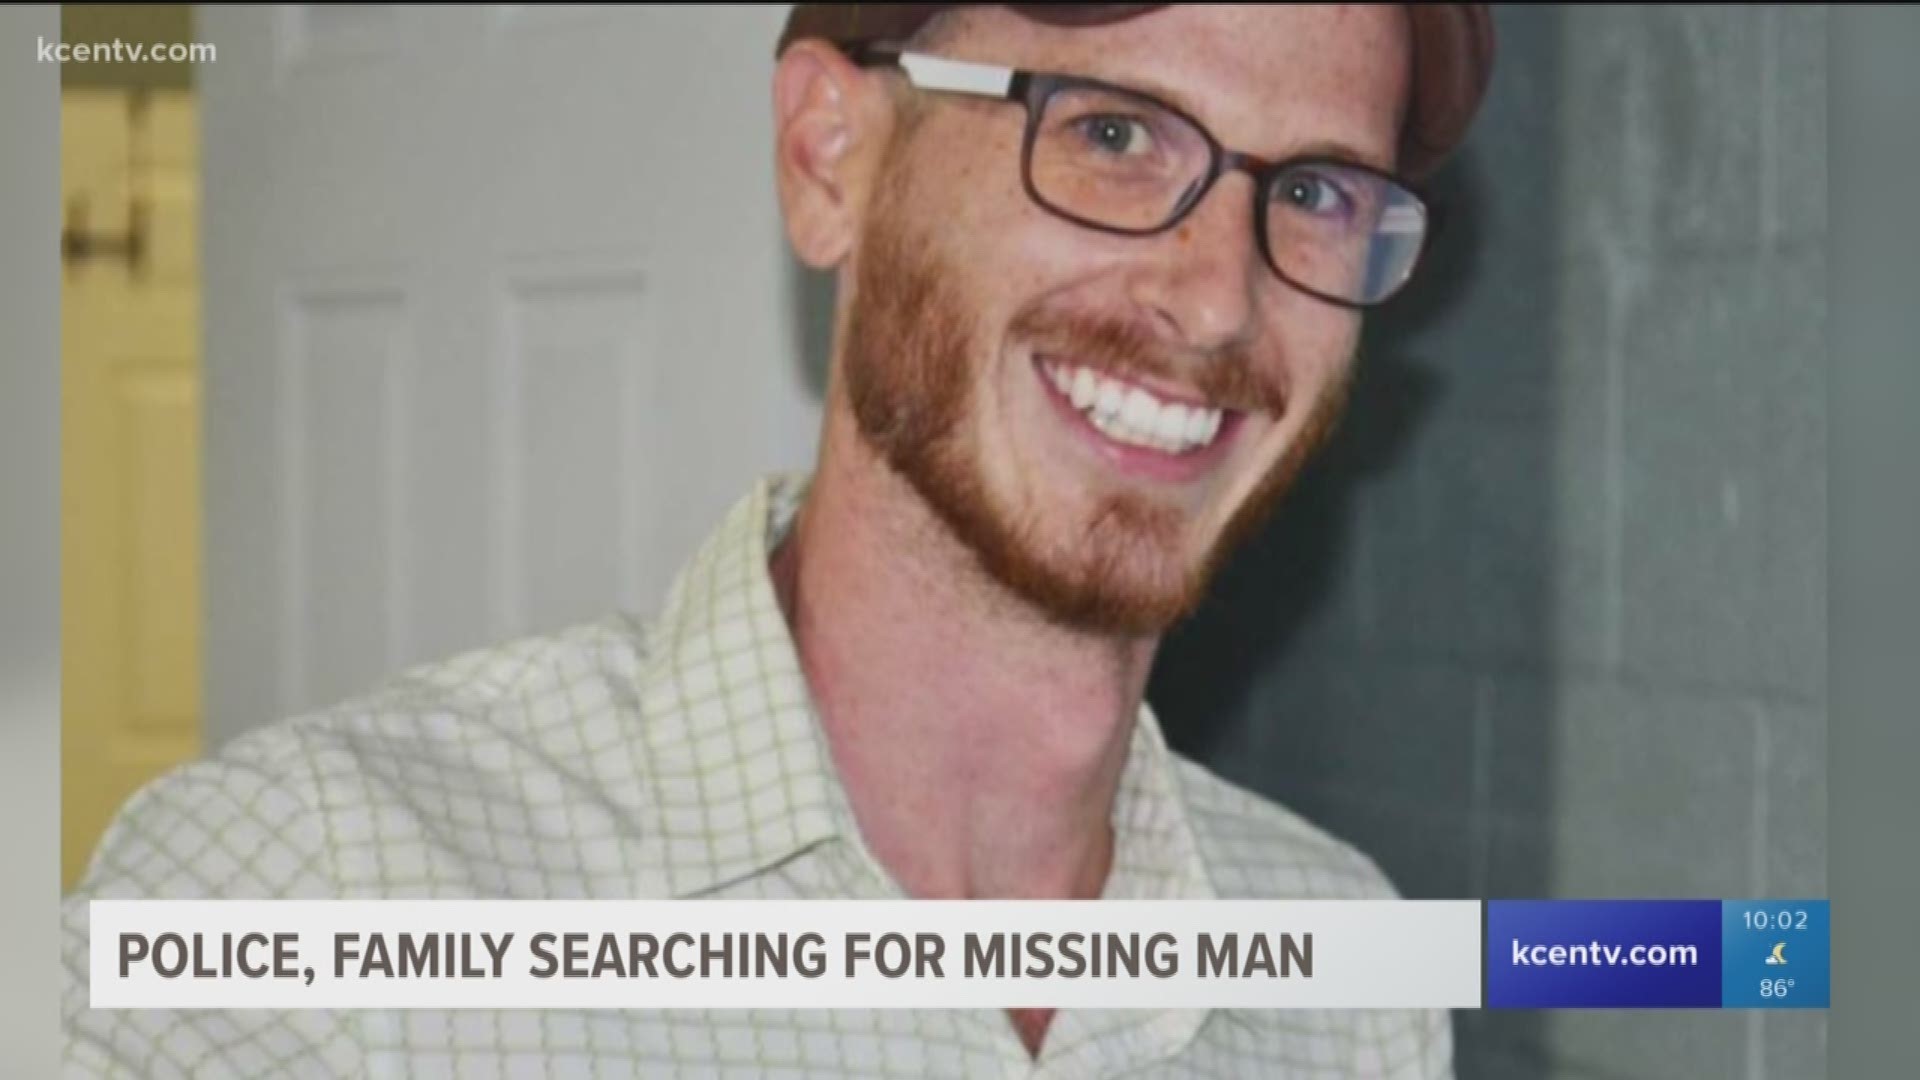 Christopher Lee's family is doing everything they can to spread the word and hopefully find him safe